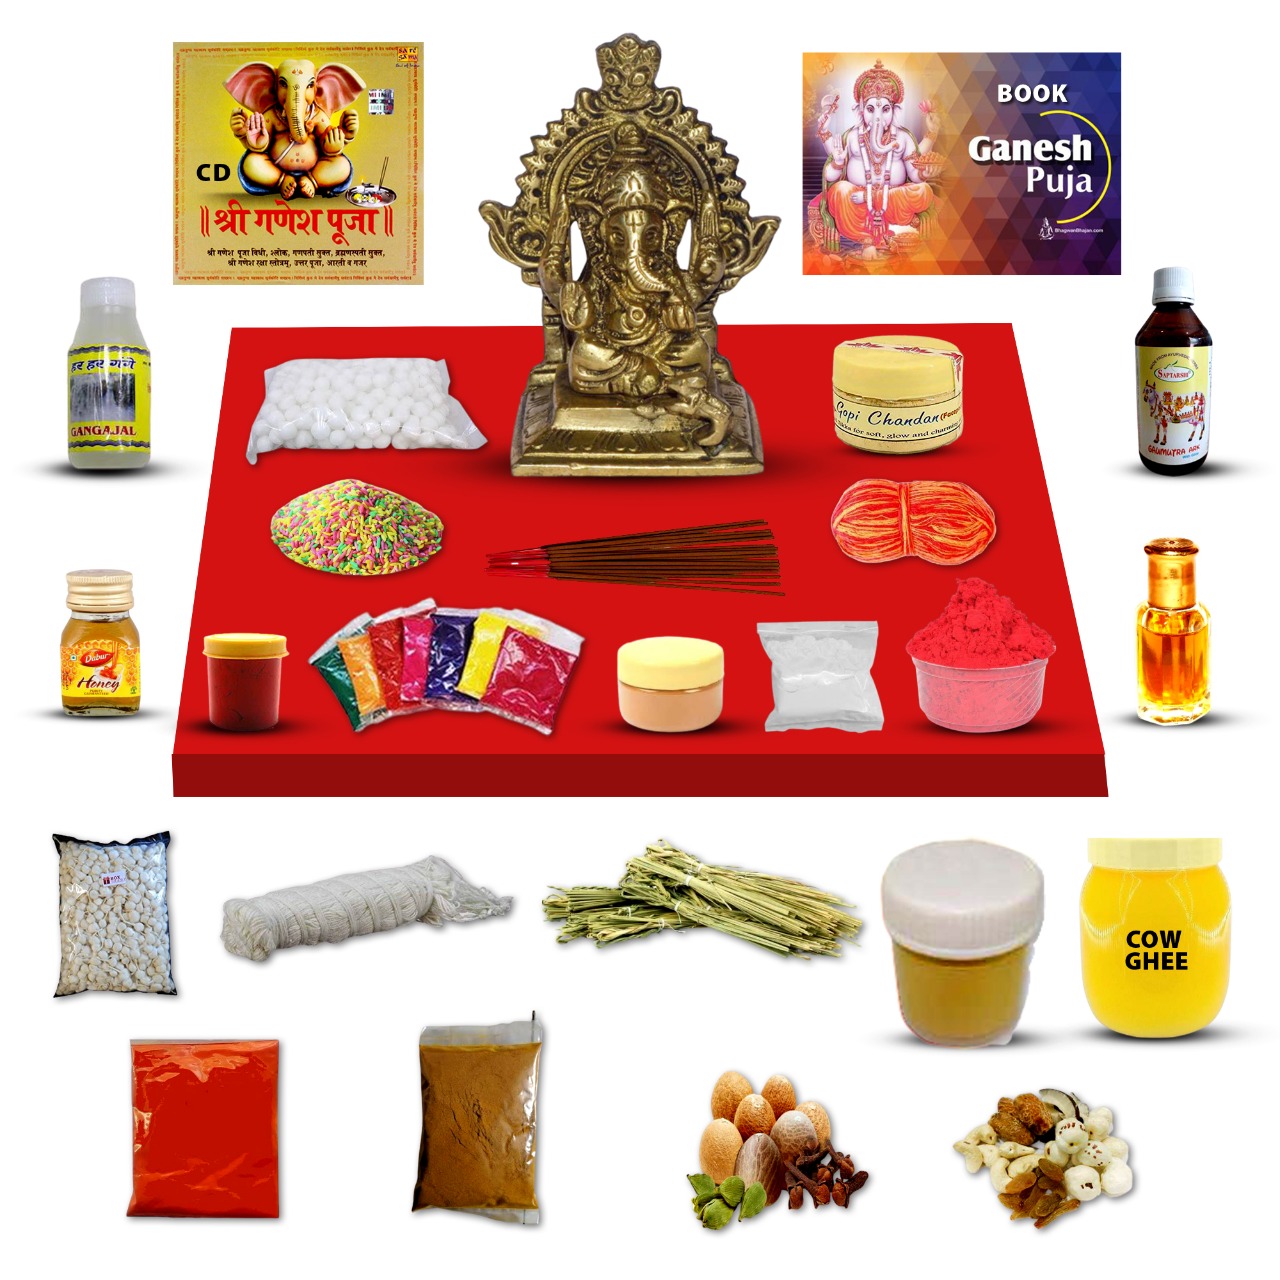 Ganesha Puja Kit - Delivery in India